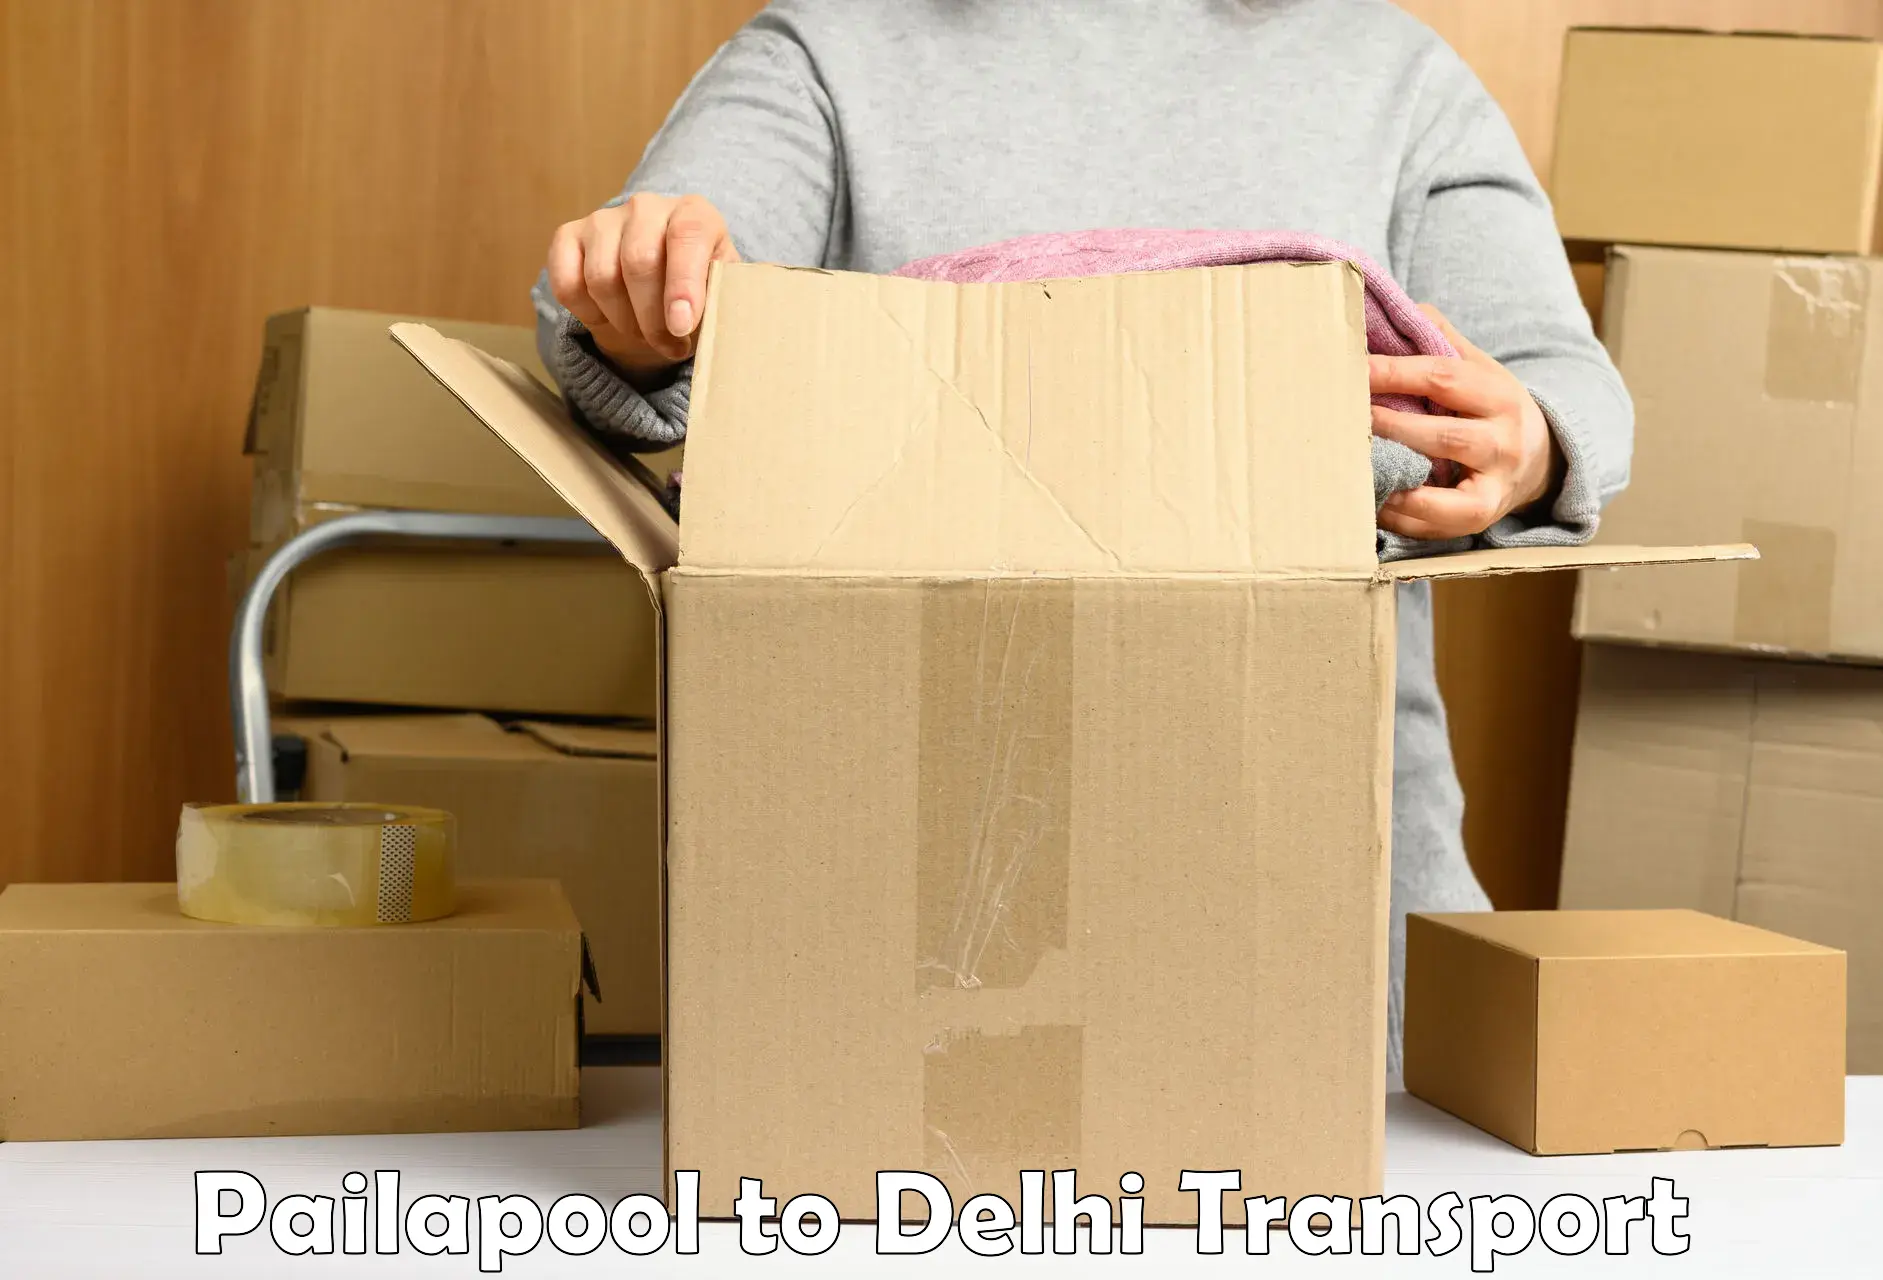 Material transport services Pailapool to University of Delhi